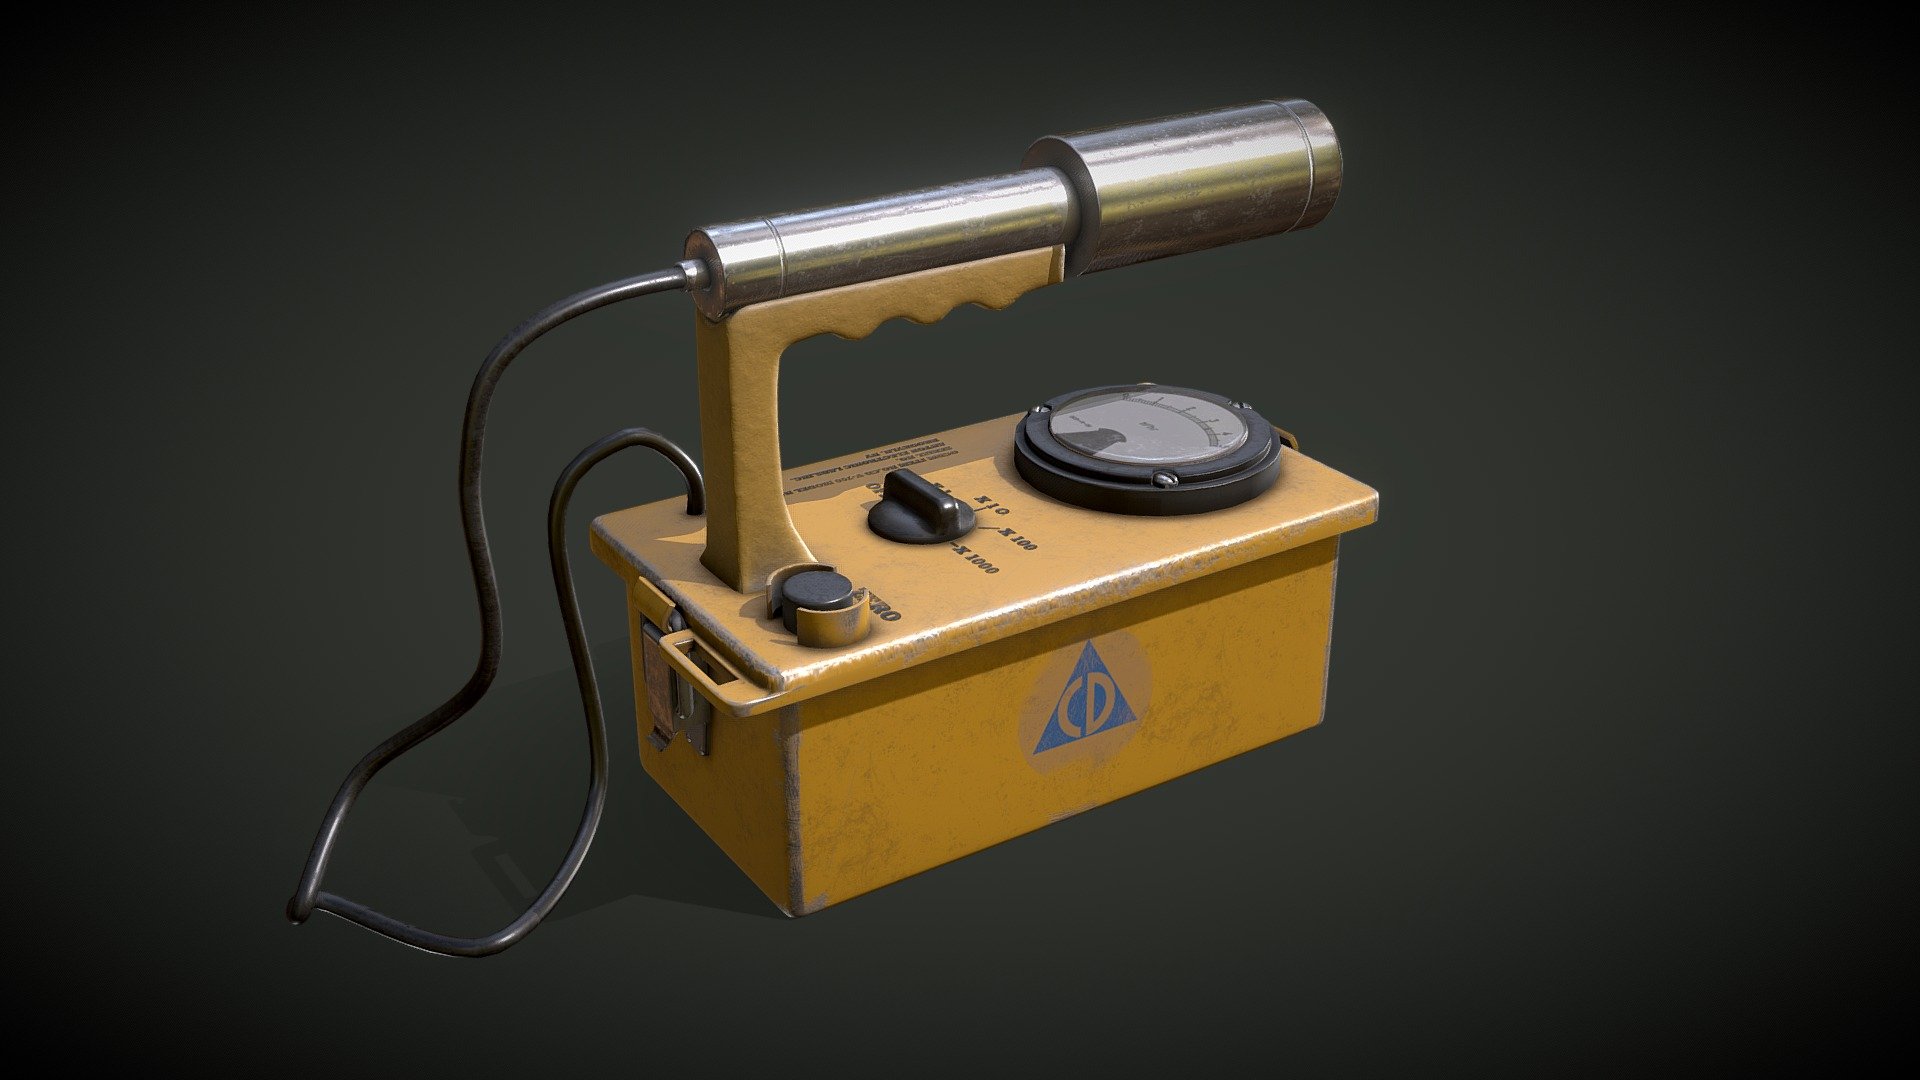 As the title suggests this model is based off a Civil defense geiger counter just made for a quick bit of practice 3d model